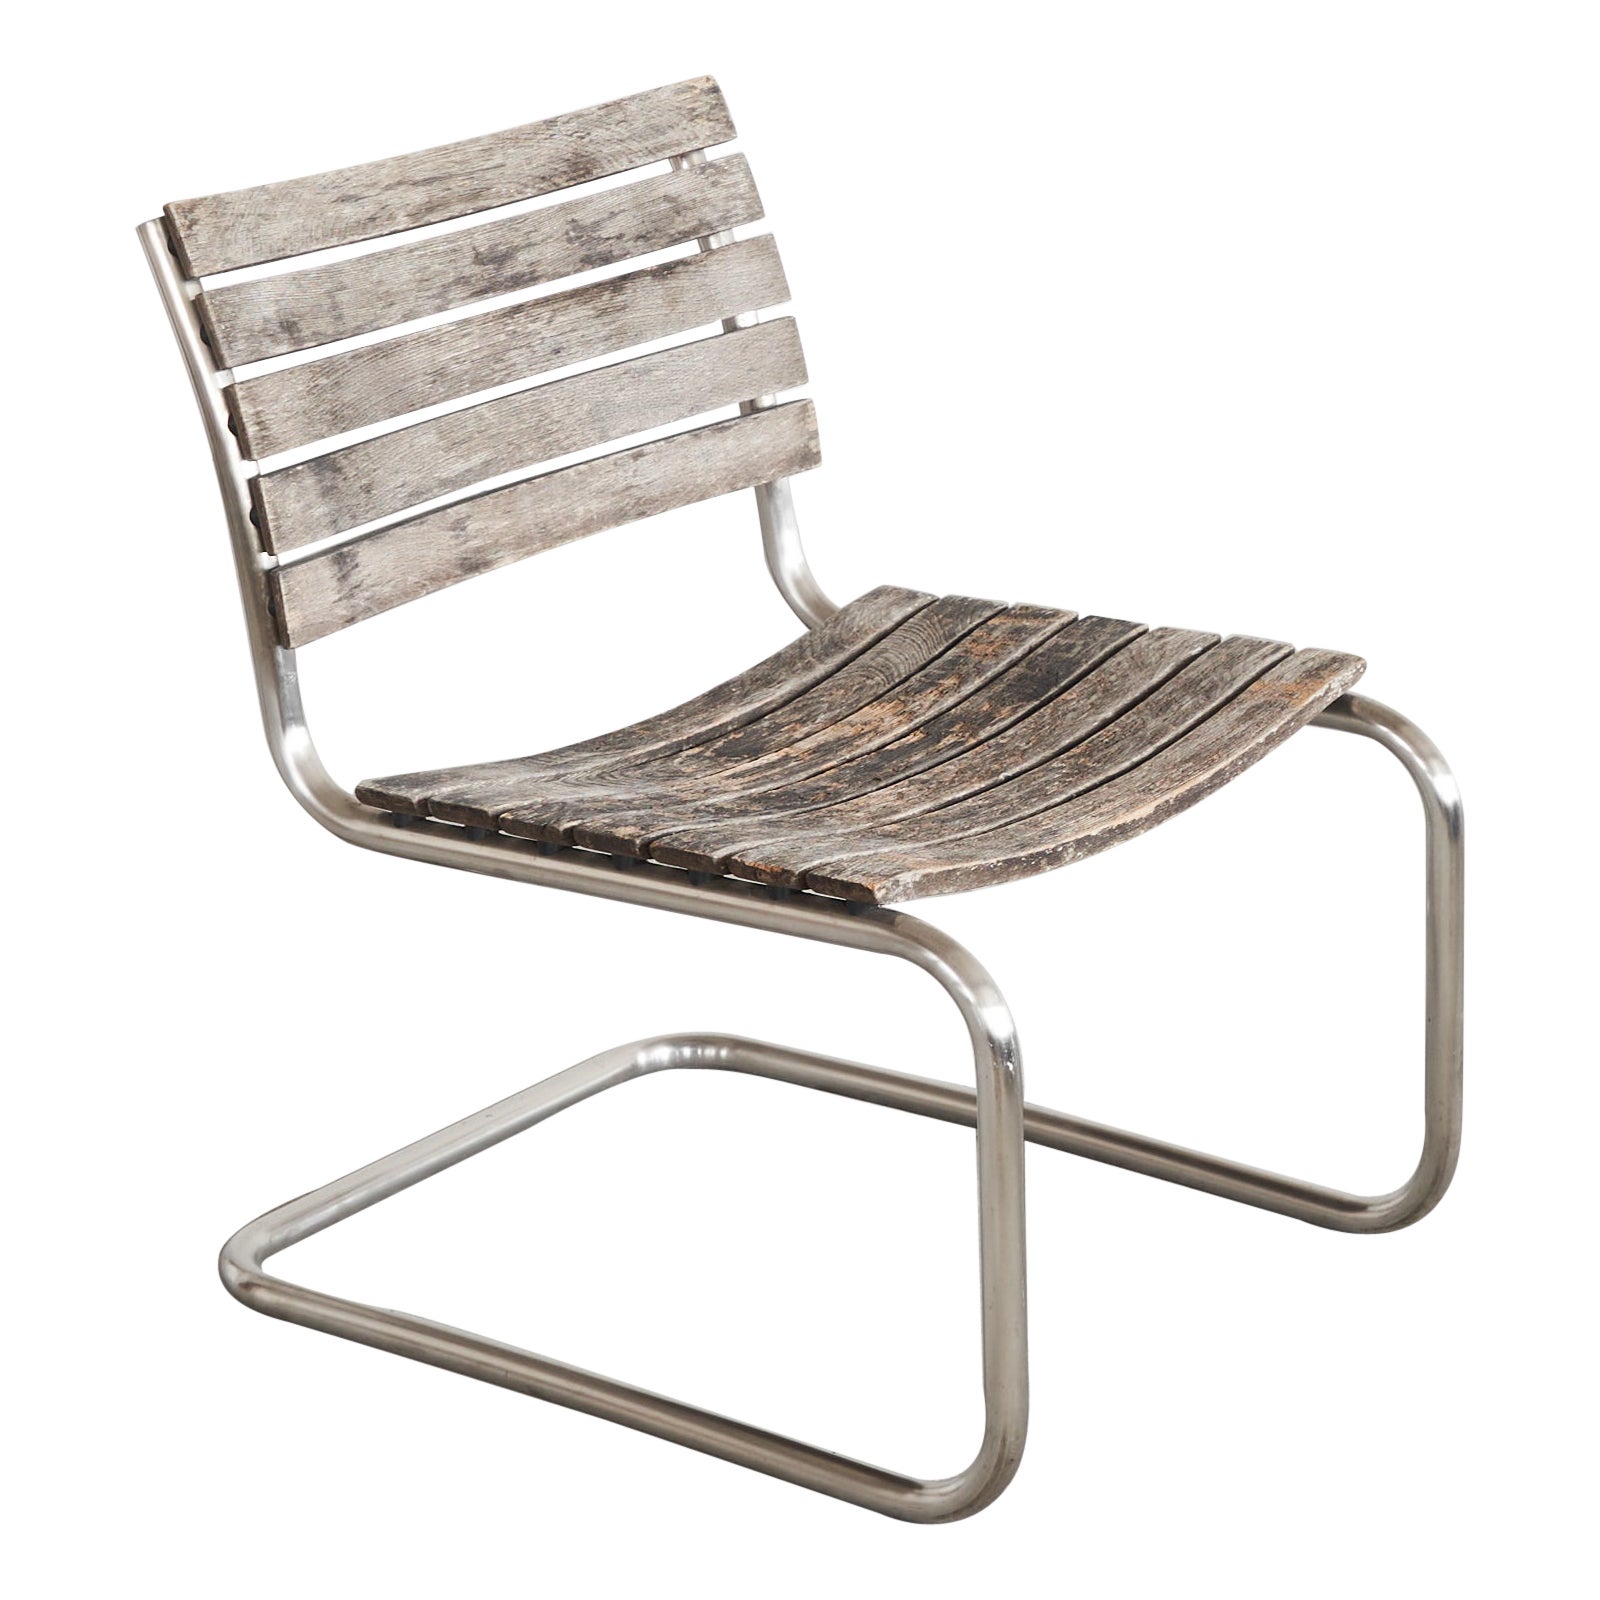 Mart Stam for Thonet Lounge Chair in Weathered Solid Iroko and Stainless Steel